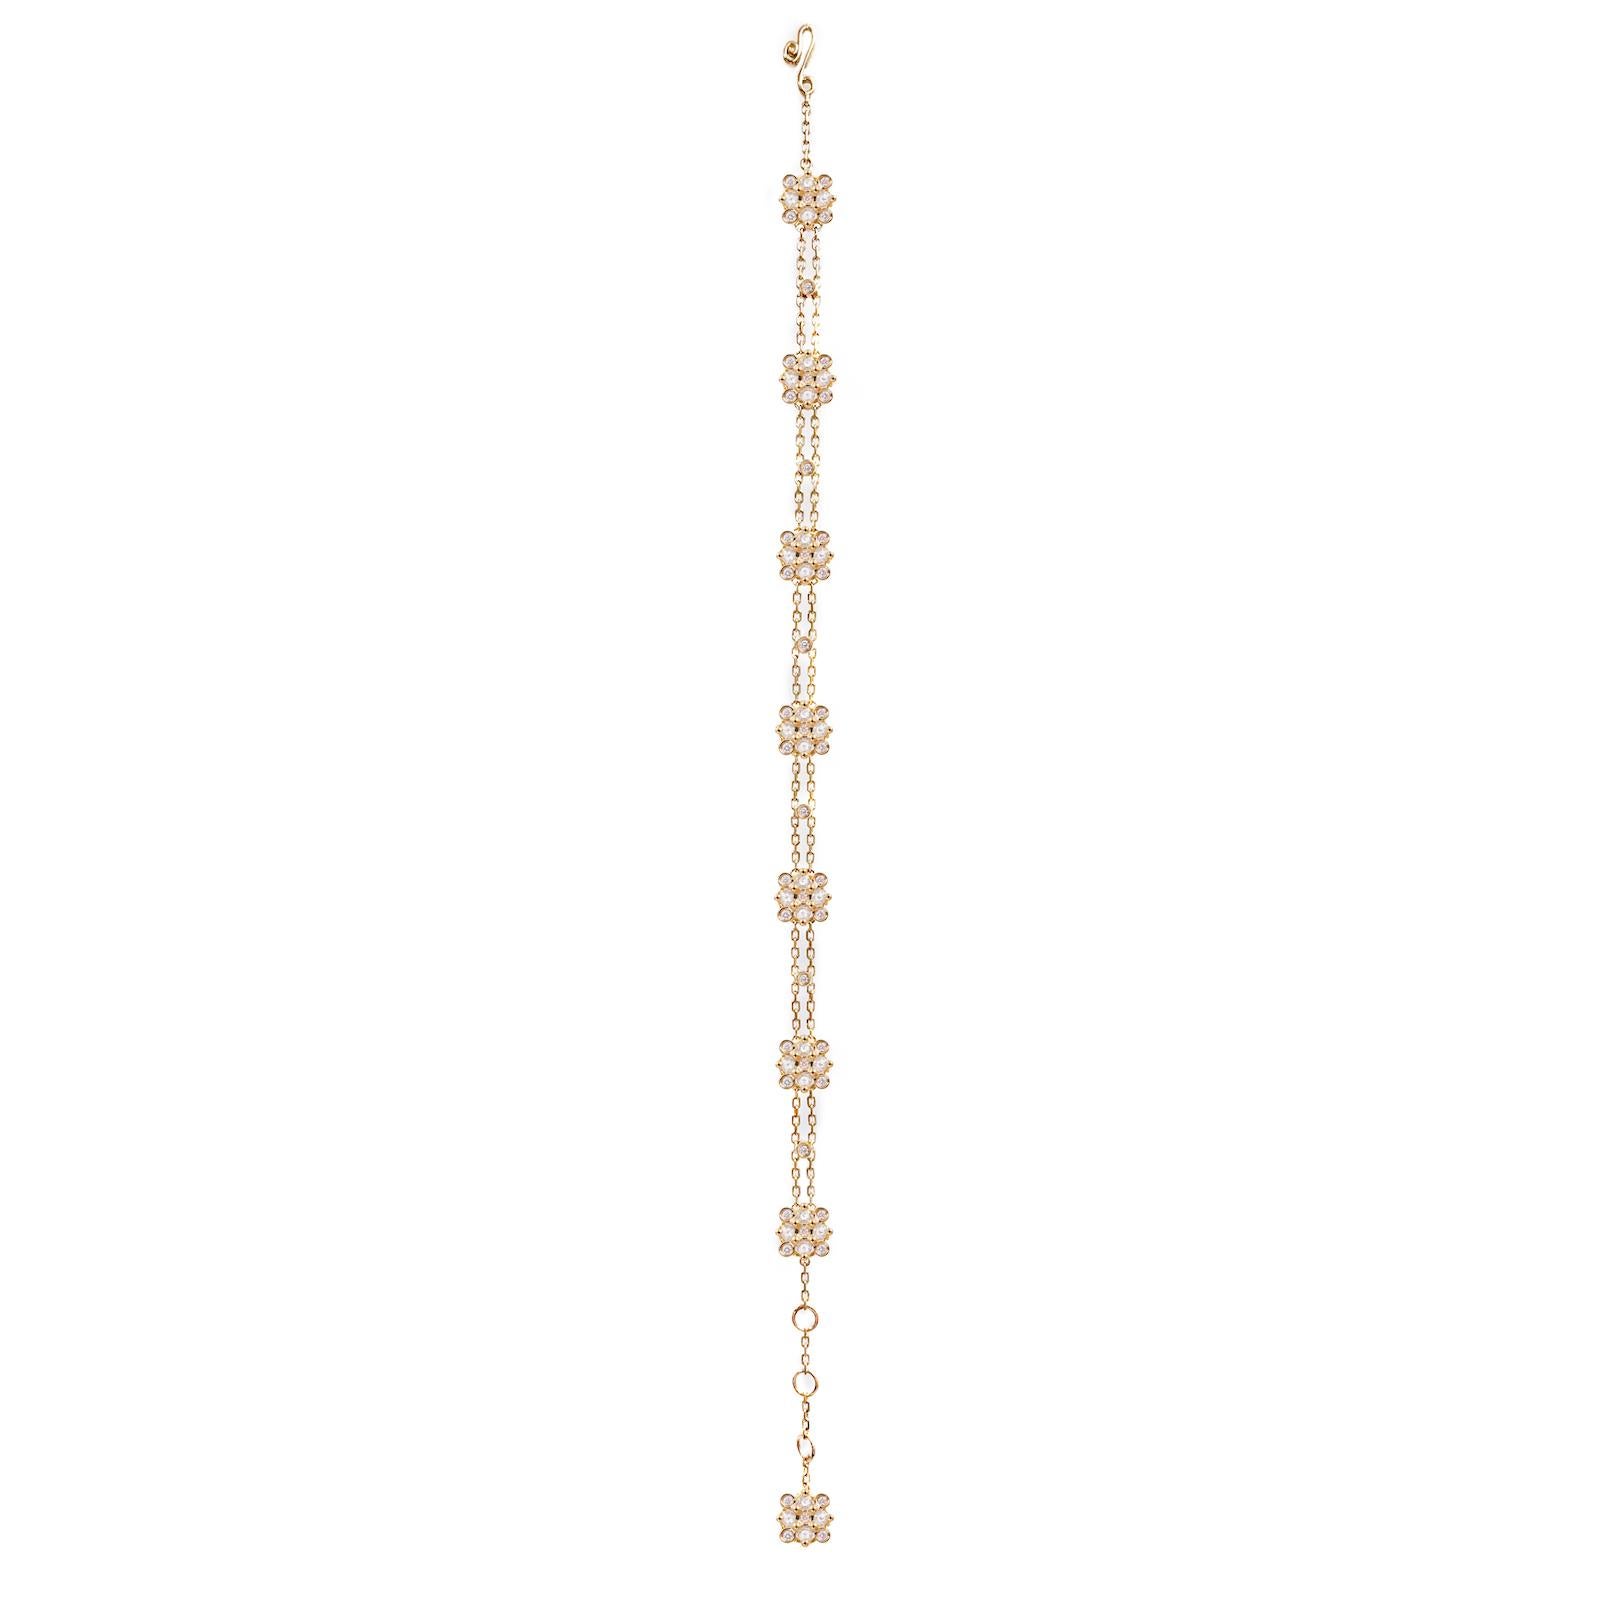 The Maia diamond square checker station bracelet drapes around your wrist like a soft ribbon. It features 7 stations of rose and brilliant cut diamonds that are arranged in a square checkered cluster. They're set on two strings of delicate cable